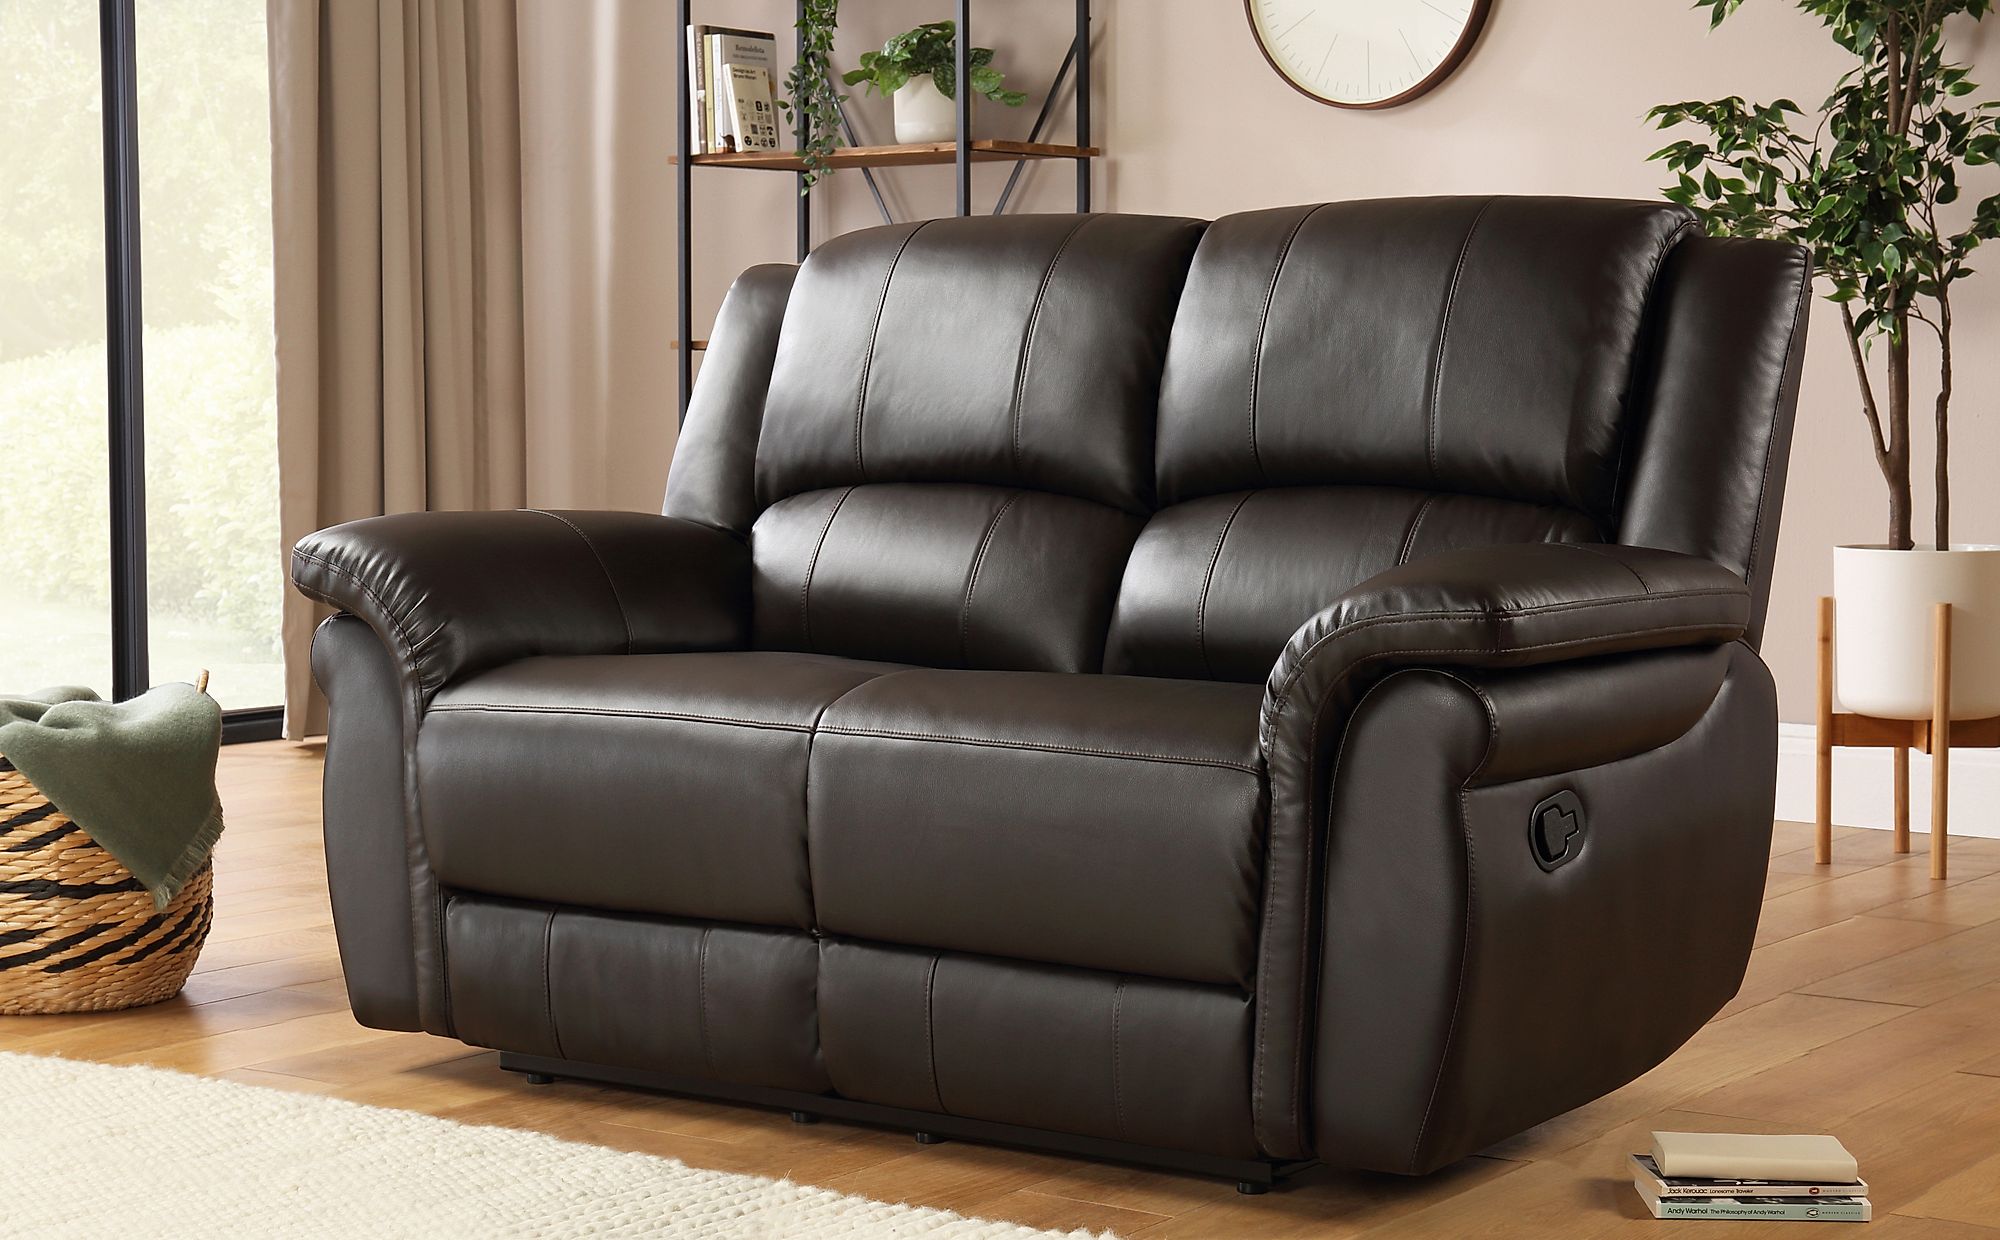 paulo large leather recliner sofa and chair